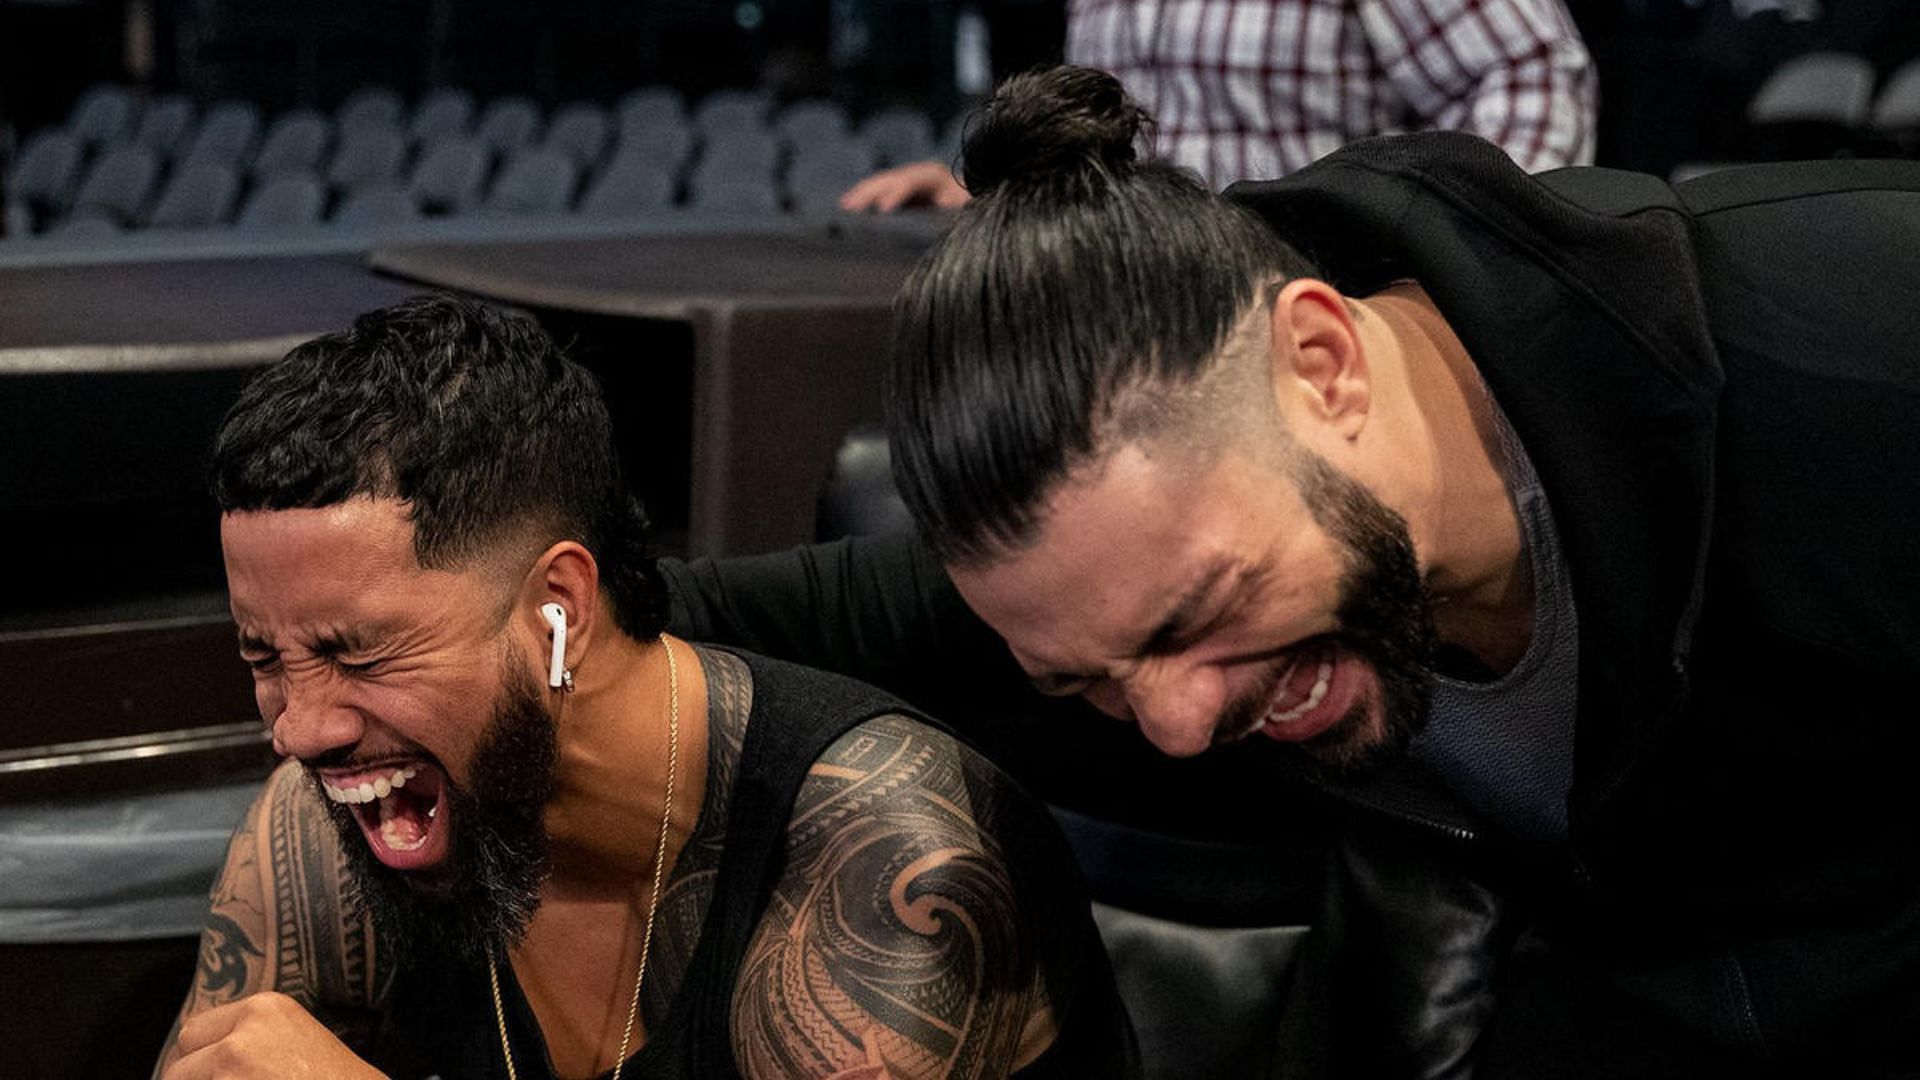 Roman Reigns and Jey Uso of The Bloodline!